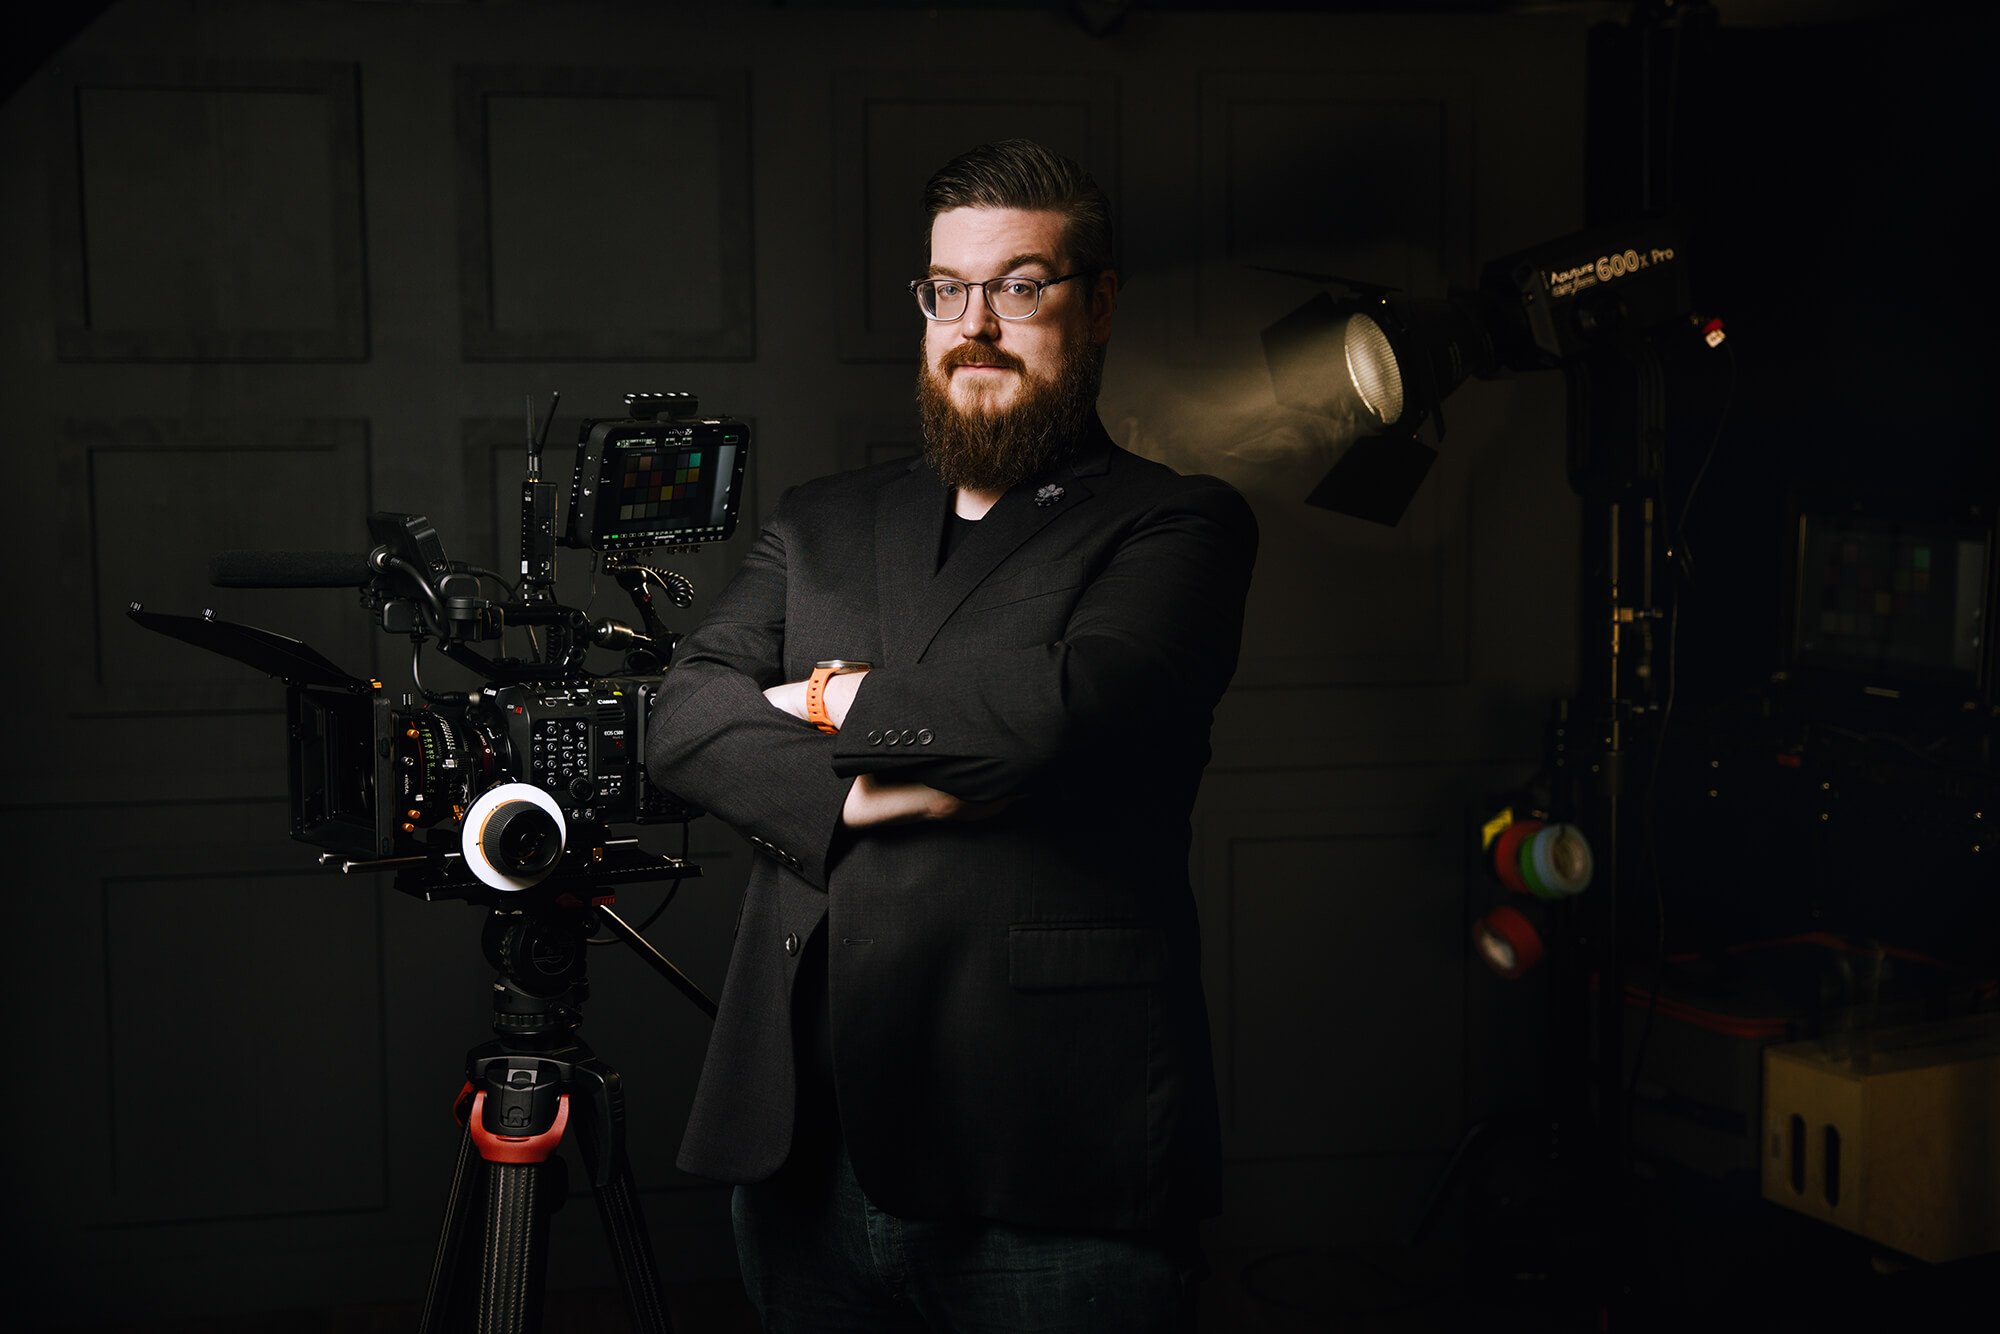 Photograph of Stephen Beres with his arms crossed, standing around filmmaking equipment.